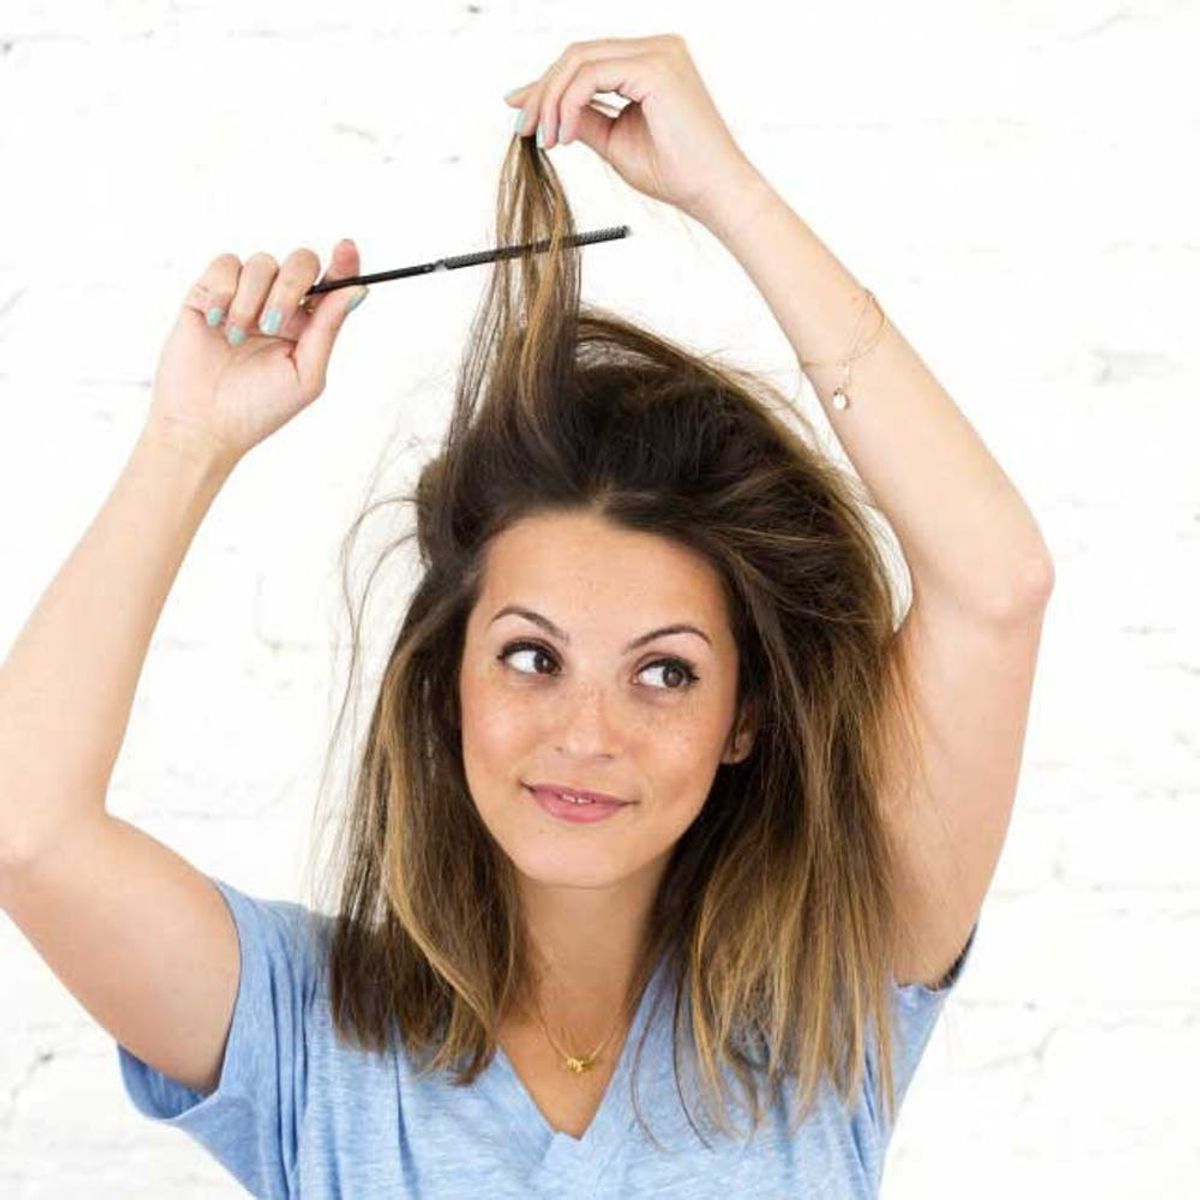 Why One Side of Your Hair Styles Better and How to Fix That!